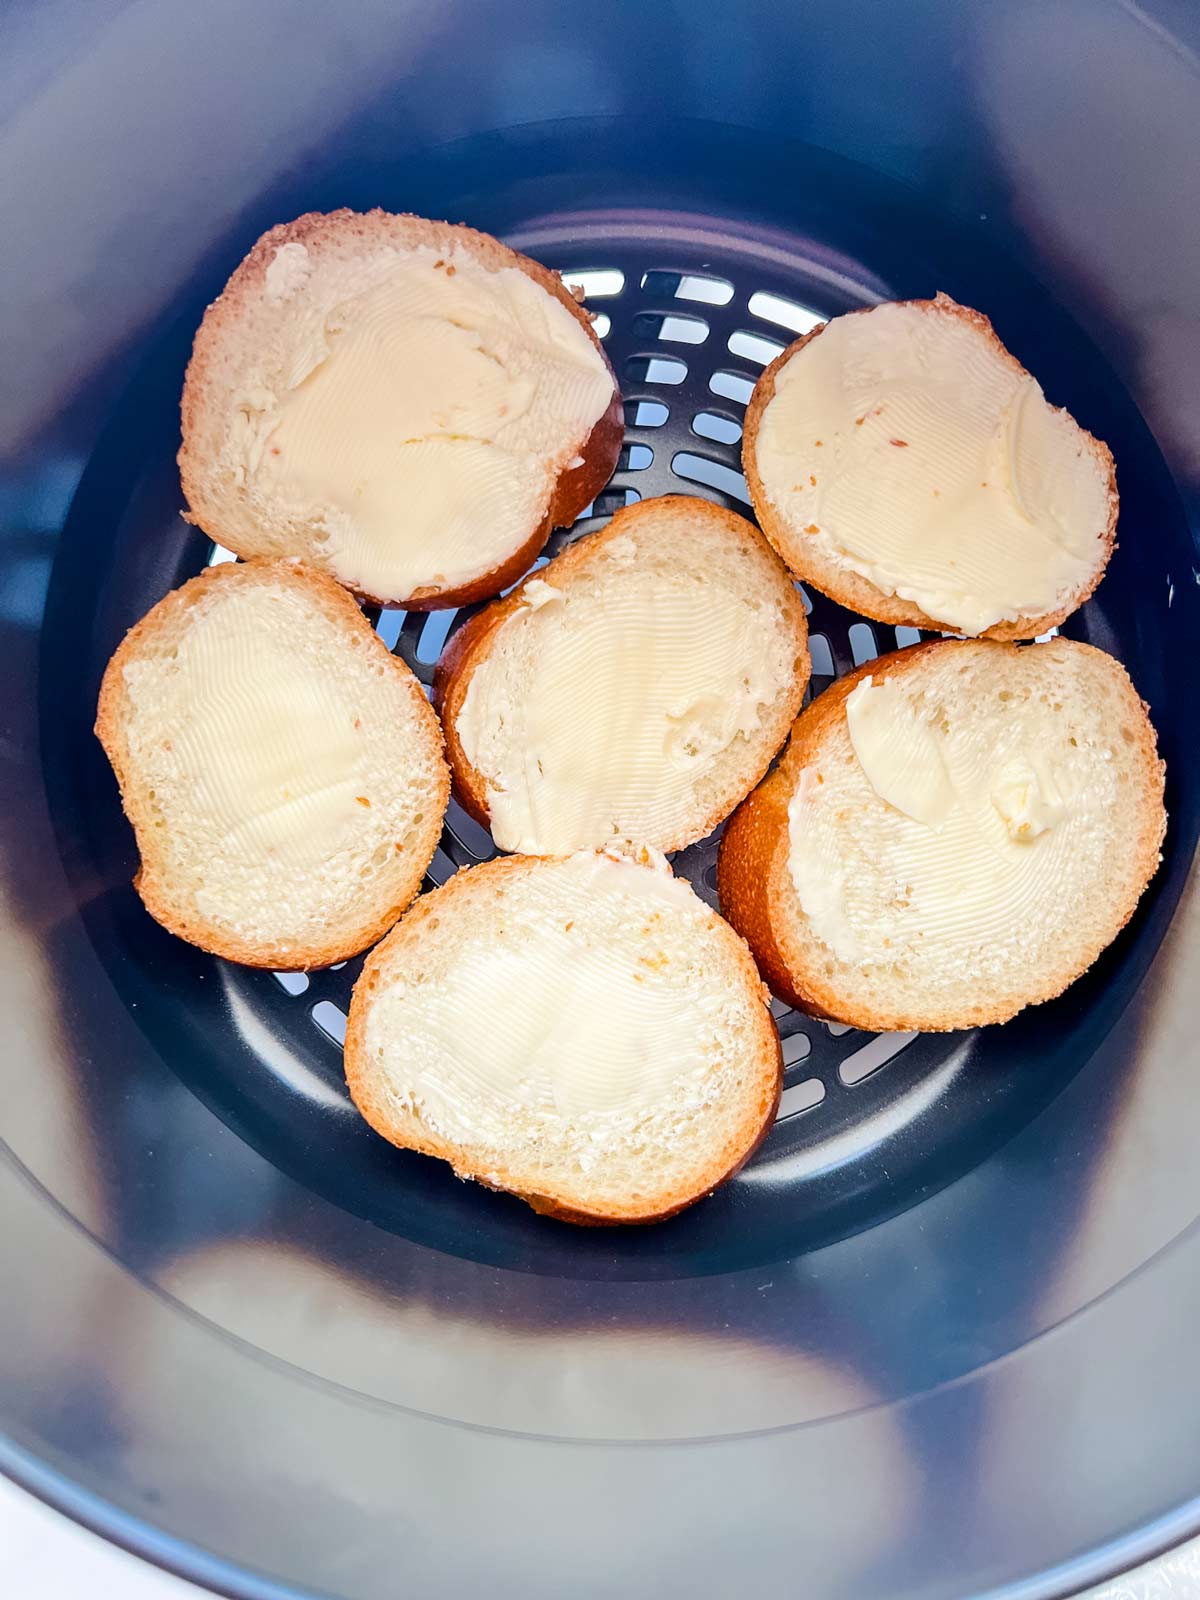 Buttered french bread in the air fryer basket of a Ninja Foodi.